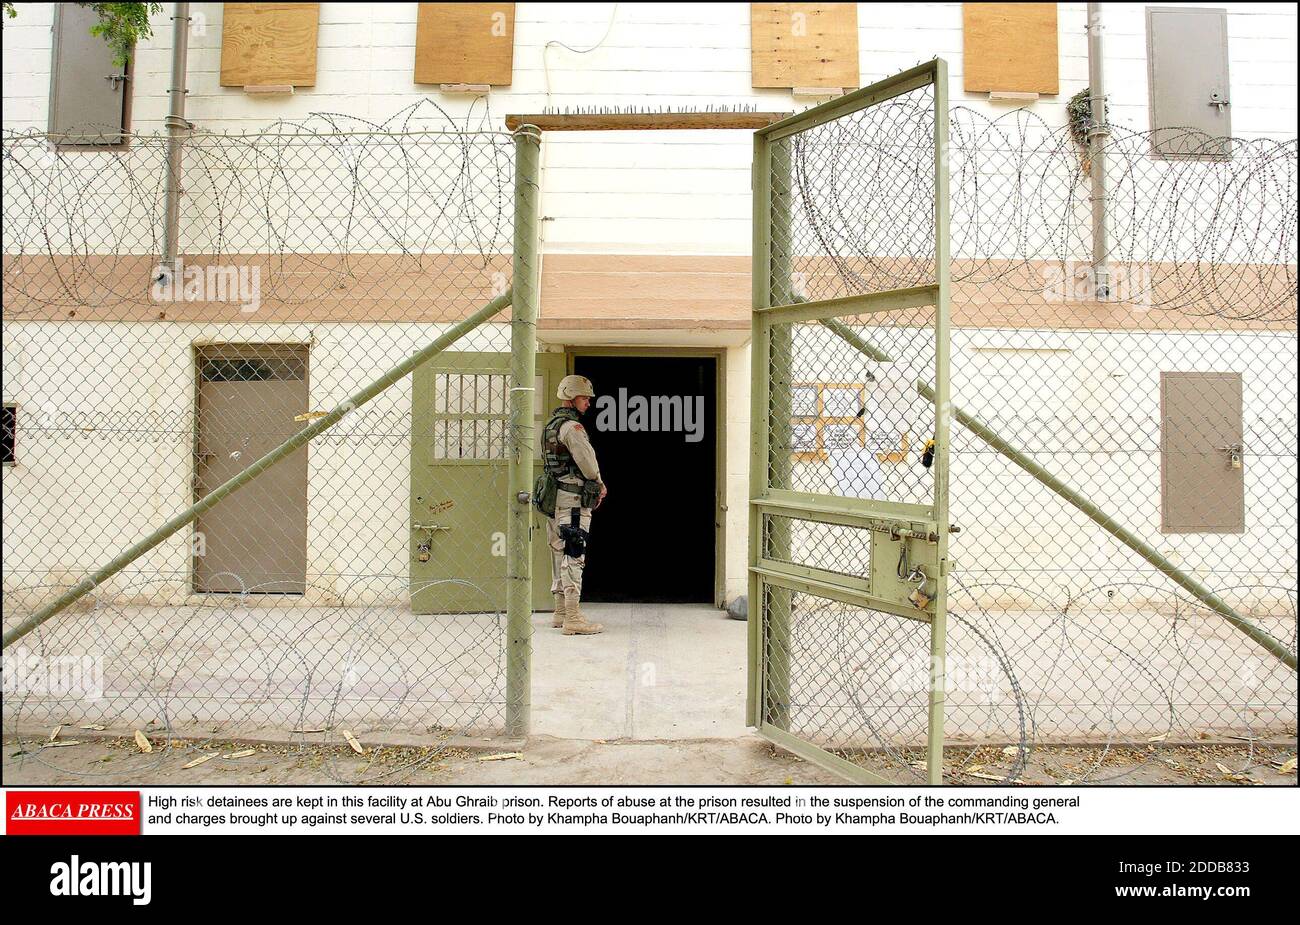 NO FILM, NO VIDEO, NO TV, NO DOCUMENTARY - High risk detainees are kept in this facility at Abu Ghraib prison. Reports of abuse at the prison resulted in the suspension of the commanding general and charges brought up against several U.S. soldiers. Photo by Khampha Bouaphanh/KRT/ABACA. Stock Photo